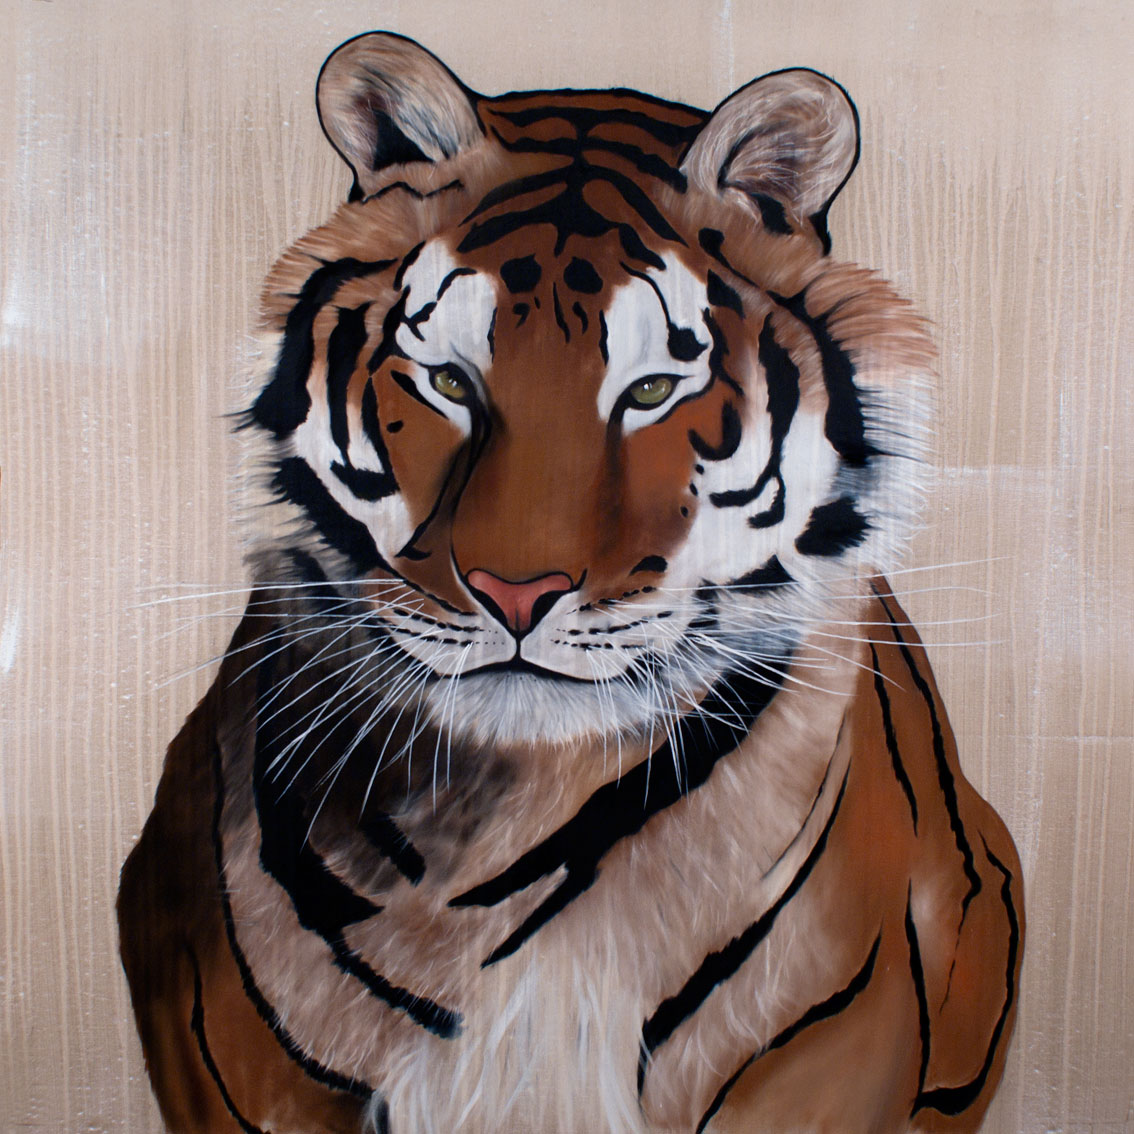 ROYAL-TIGER tiger Thierry Bisch Contemporary painter animals painting art  nature biodiversity conservation 